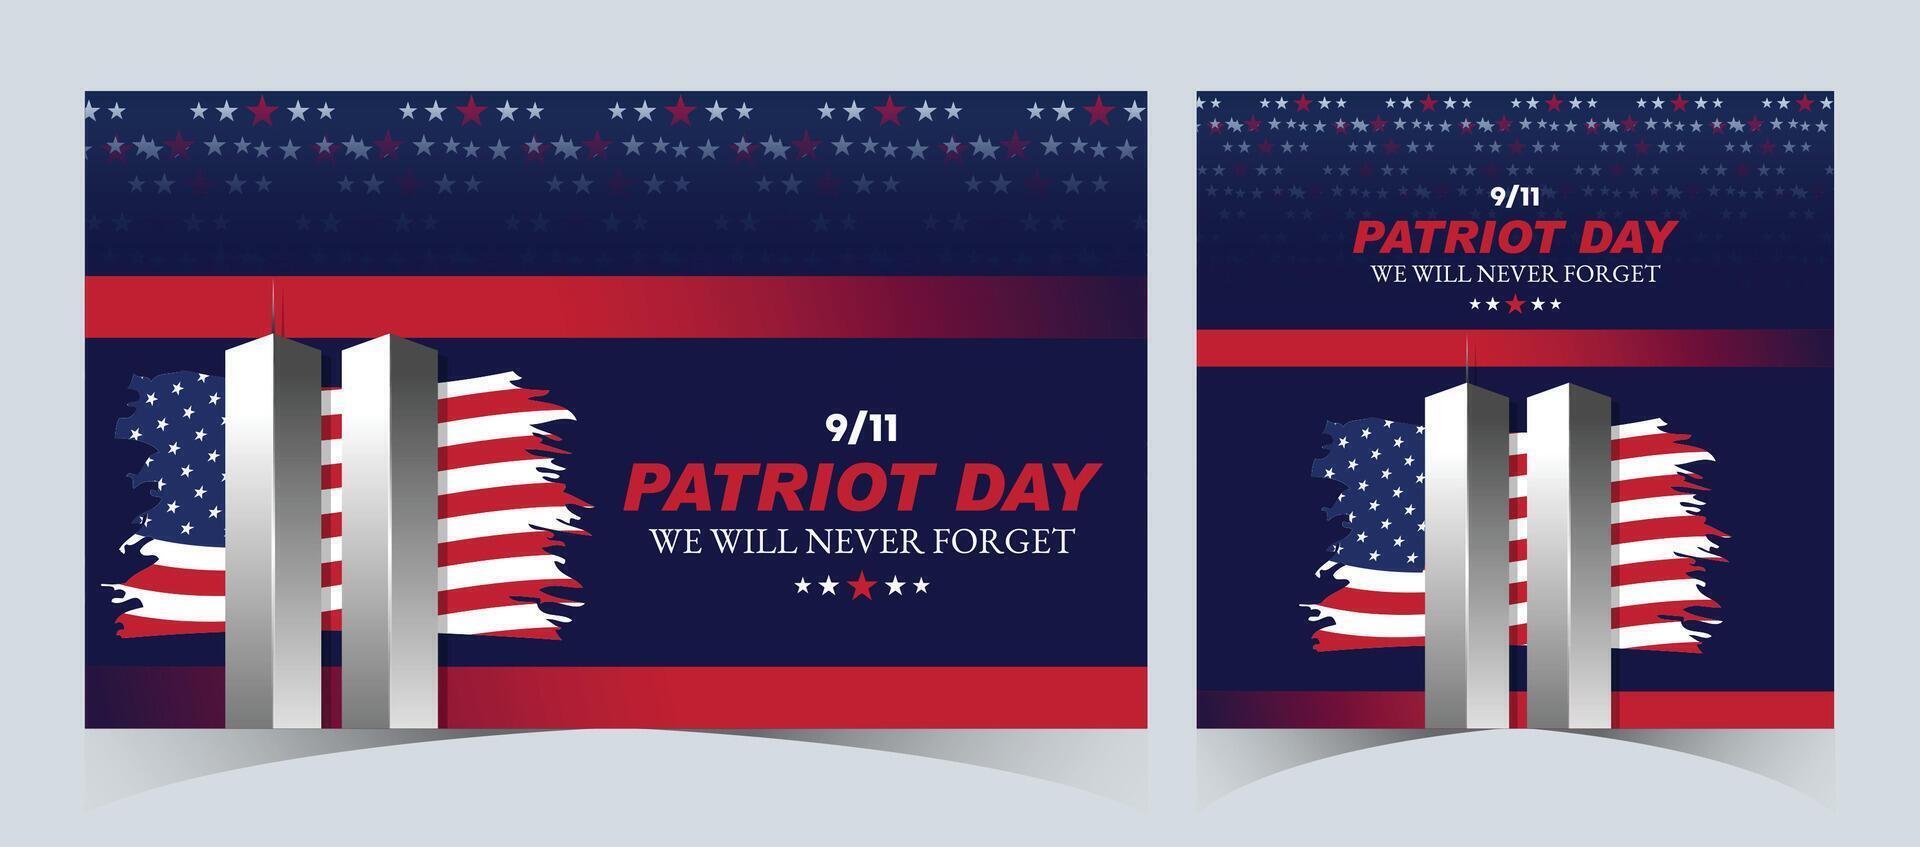 Set of Remembering September 9 11. Patriot Day. September 11. Never Forget USA 9 11. Twin Towers On American Flag. World Trade Center Nine Eleven. Vector Design Template in Red, White, And Blue Colour